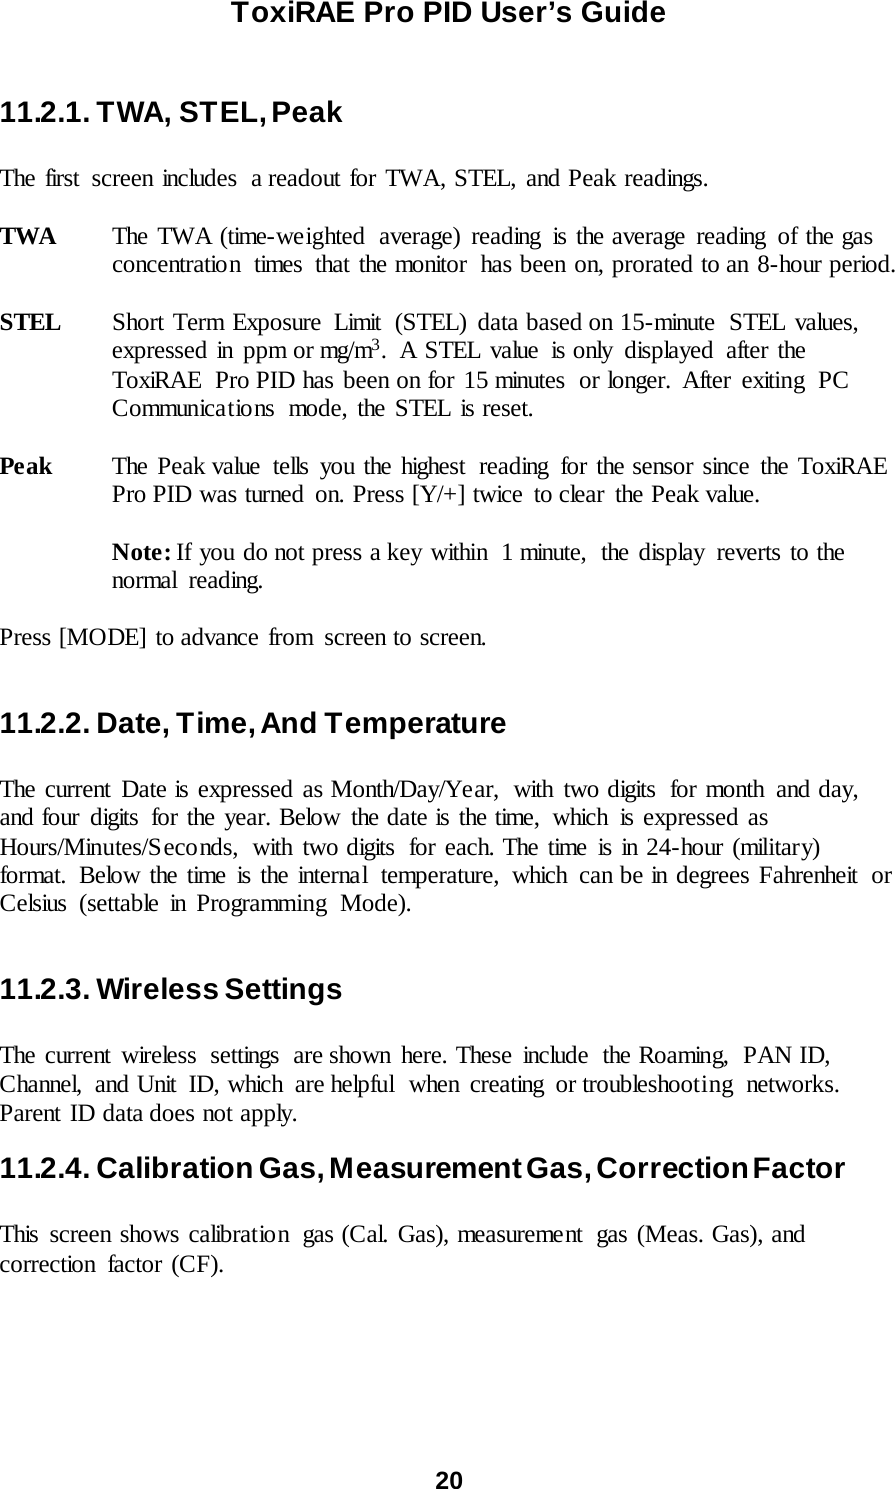 ToxiRAE Pro PID User’s Guide  20   11.2.1. TWA, STEL, Peak  The first screen includes  a readout for TWA, STEL, and Peak readings.  TWA The TWA (time-weighted average) reading is the average reading  of the gas concentration  times  that the monitor  has been on, prorated to an 8-hour period.  STEL Short Term Exposure  Limit  (STEL) data based on 15-minute  STEL values, expressed in ppm or mg/m3. A STEL value is only displayed after the ToxiRAE  Pro PID has been on for 15 minutes or longer.  After exiting PC Communica tio ns mode, the STEL is reset.  Peak The Peak value tells you the highest  reading for the sensor since the ToxiRAE Pro PID was turned on. Press [Y/+] twice to clear the Peak value.   Note: If you do not press a key within  1 minute,  the display reverts to the normal reading.  Press [MODE] to advance from  screen to screen.  11.2.2. Date, Time, And Temperature  The current  Date is expressed as Month/Day/Year,  with two digits  for month  and day, and four digits  for the year. Below the date is the time,  which  is expressed as Hours/Minutes/Seconds,  with two digits  for each. The time is in 24-hour (military) format. Below the time is the internal  temperature,  which  can be in degrees Fahrenheit  or Celsius (settable in Programming Mode).  11.2.3. Wireless Settings  The current wireless settings are shown here. These include the Roaming,  PAN ID, Channel, and Unit ID, which are helpful when creating or troubleshooting networks. Parent ID data does not apply.   11.2.4. Calibration Gas, Measurement Gas, Correction Factor  This screen shows calibration  gas (Cal. Gas), measurement  gas (Meas. Gas), and correction factor (CF).  